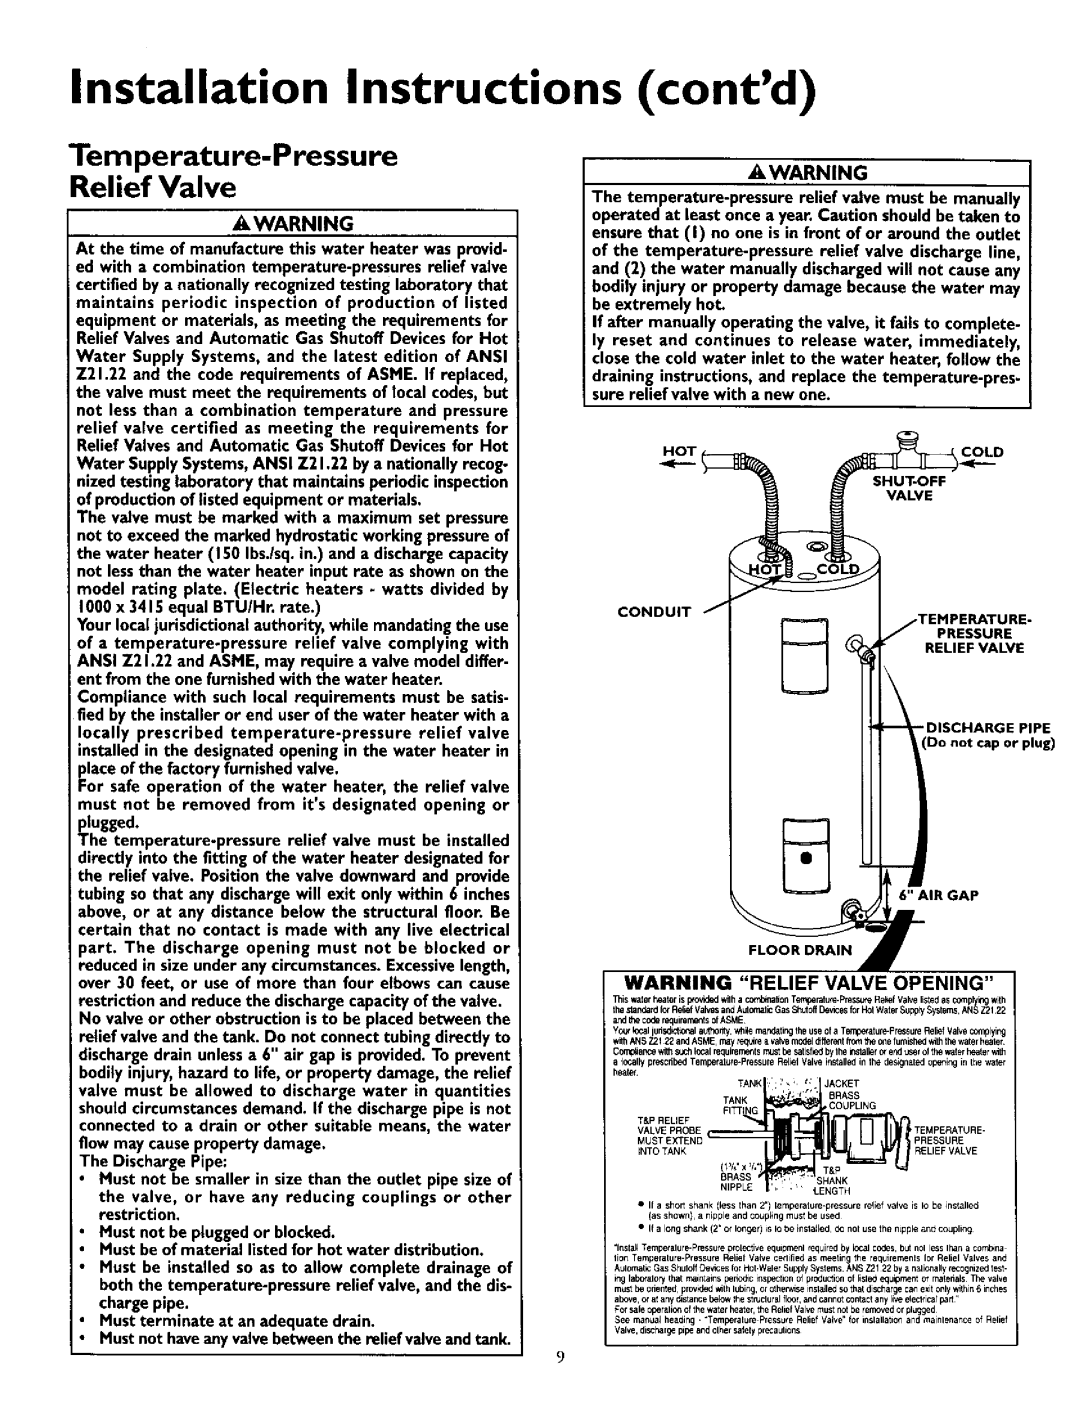 Kenmore 153.316354, 153.316554 contd, Installation Instructions, Temperature-Pressure Relief Valve, be extremely hot 